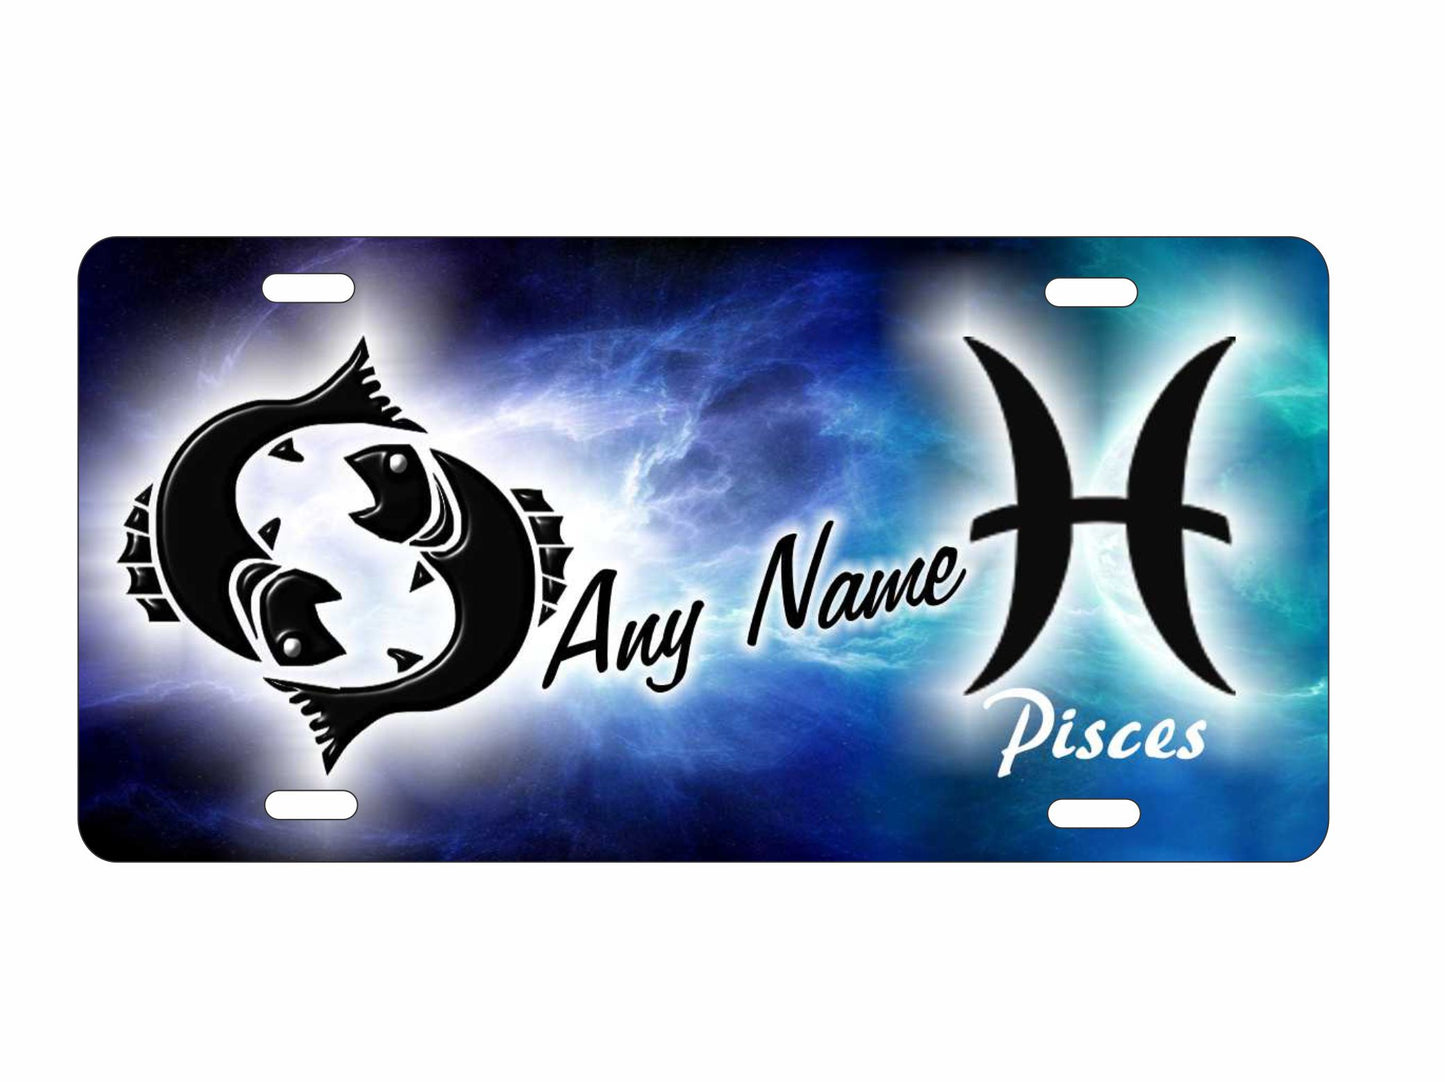 Pisces zodiac symbol Astrological sign personalized novelty decorative front license plate